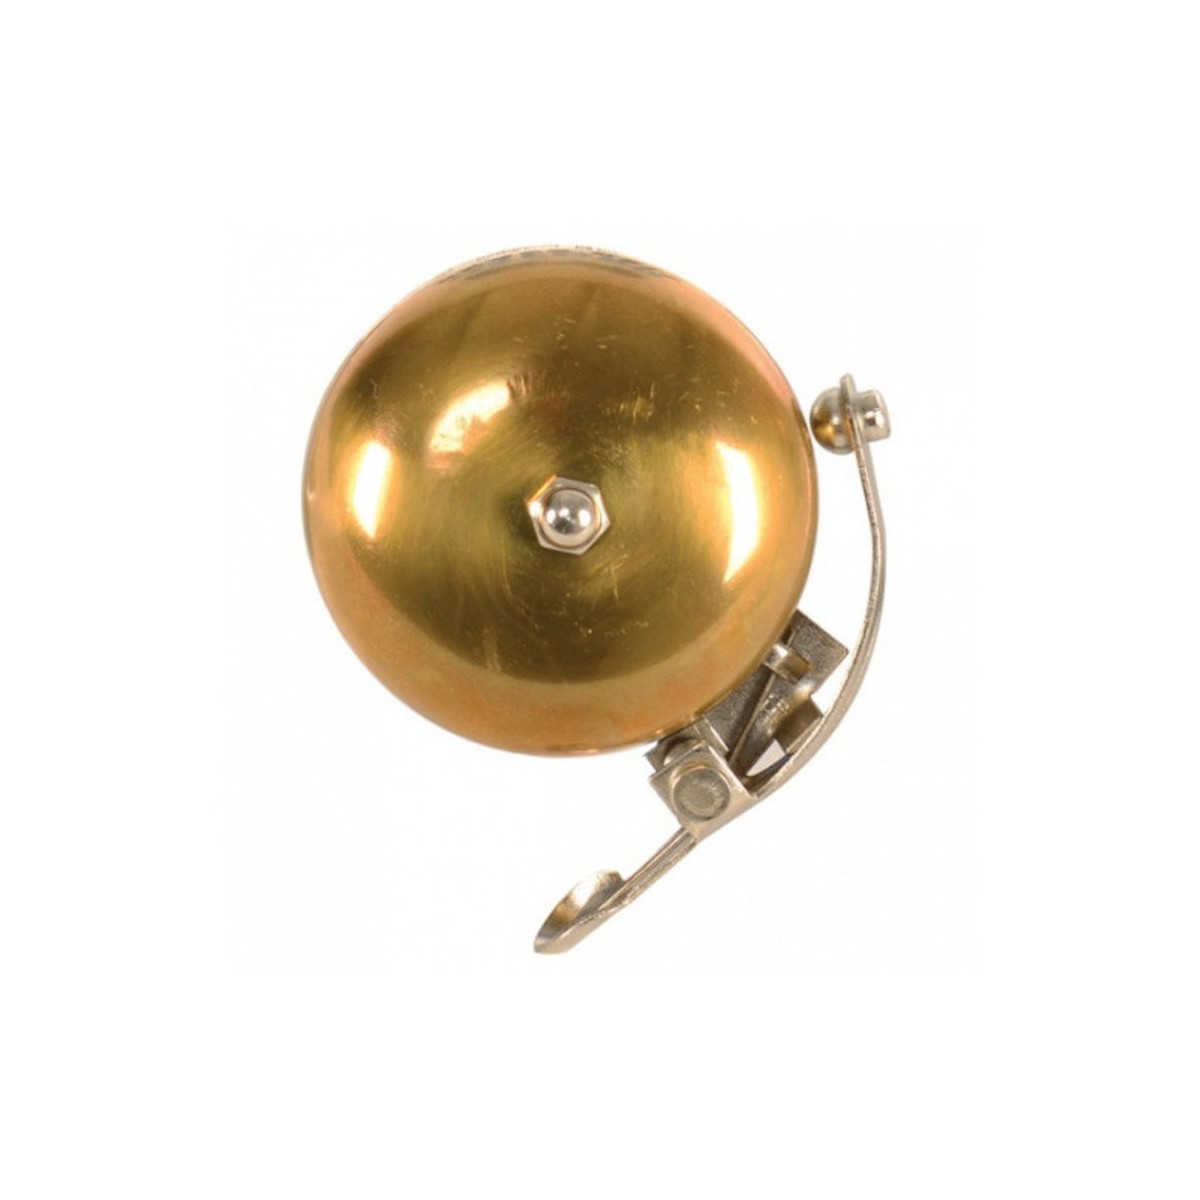 OXC TRADITIONAL bell - gold